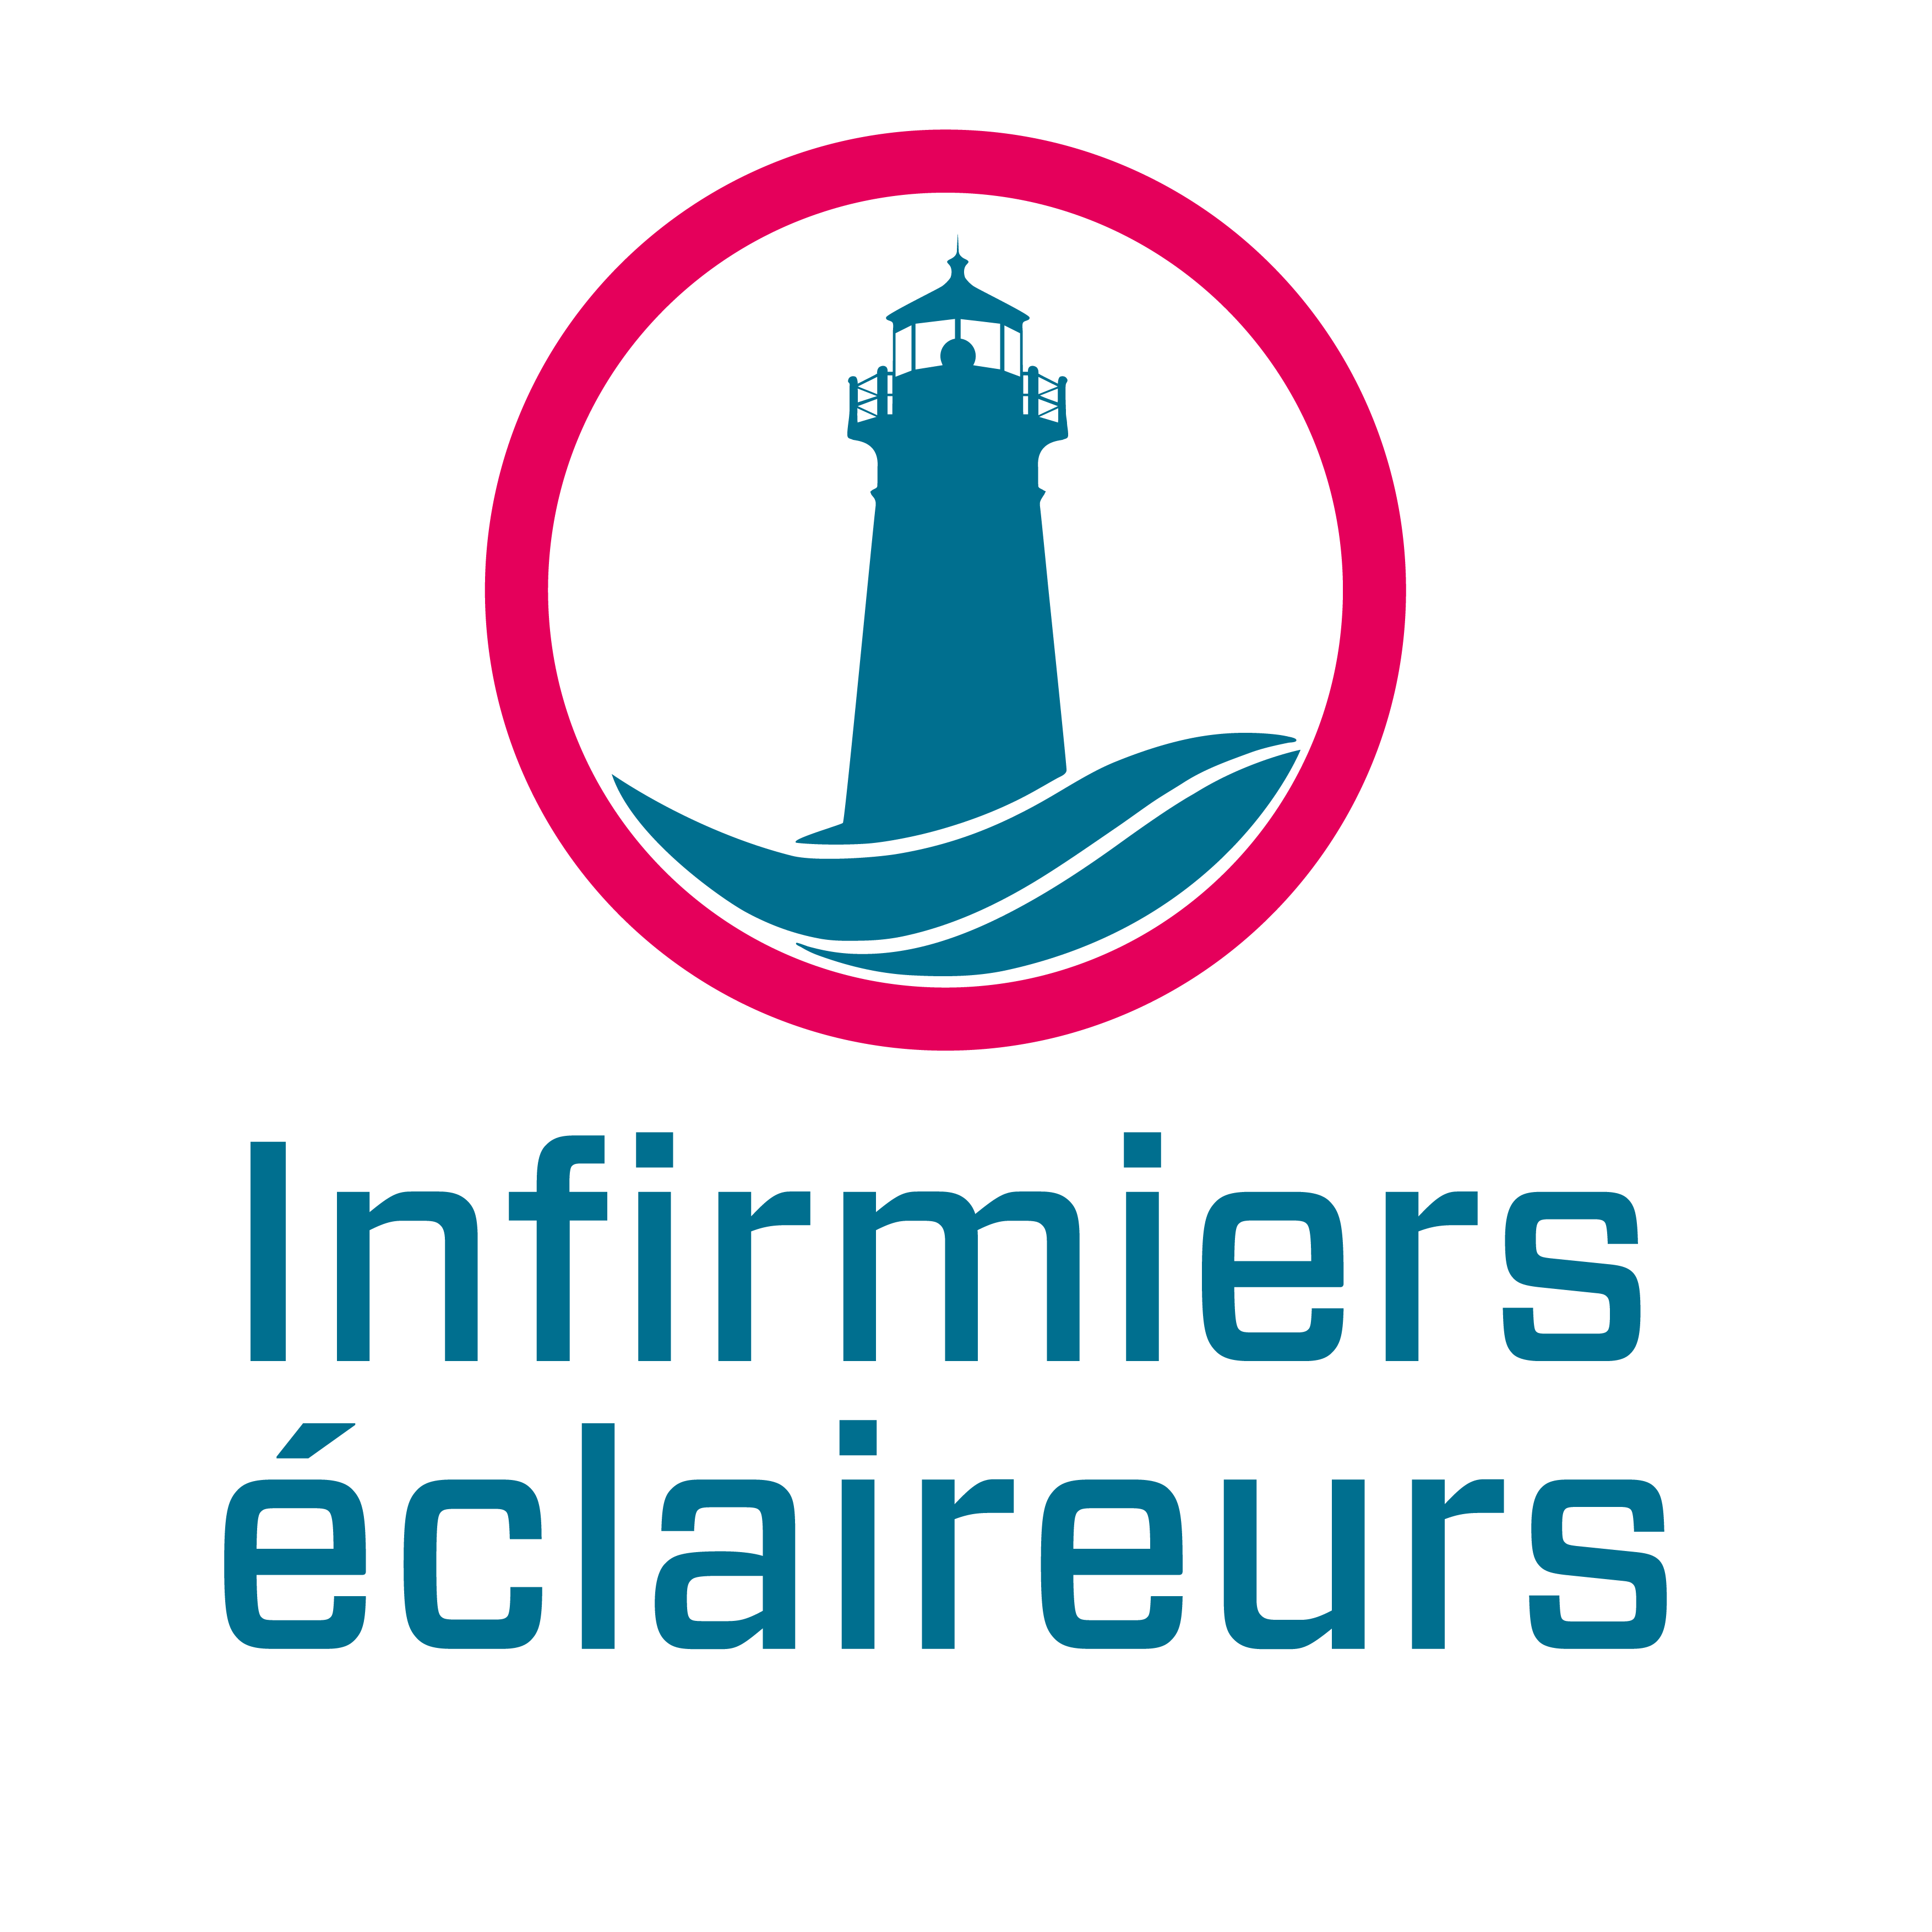 Infirmiers Eclaireurs